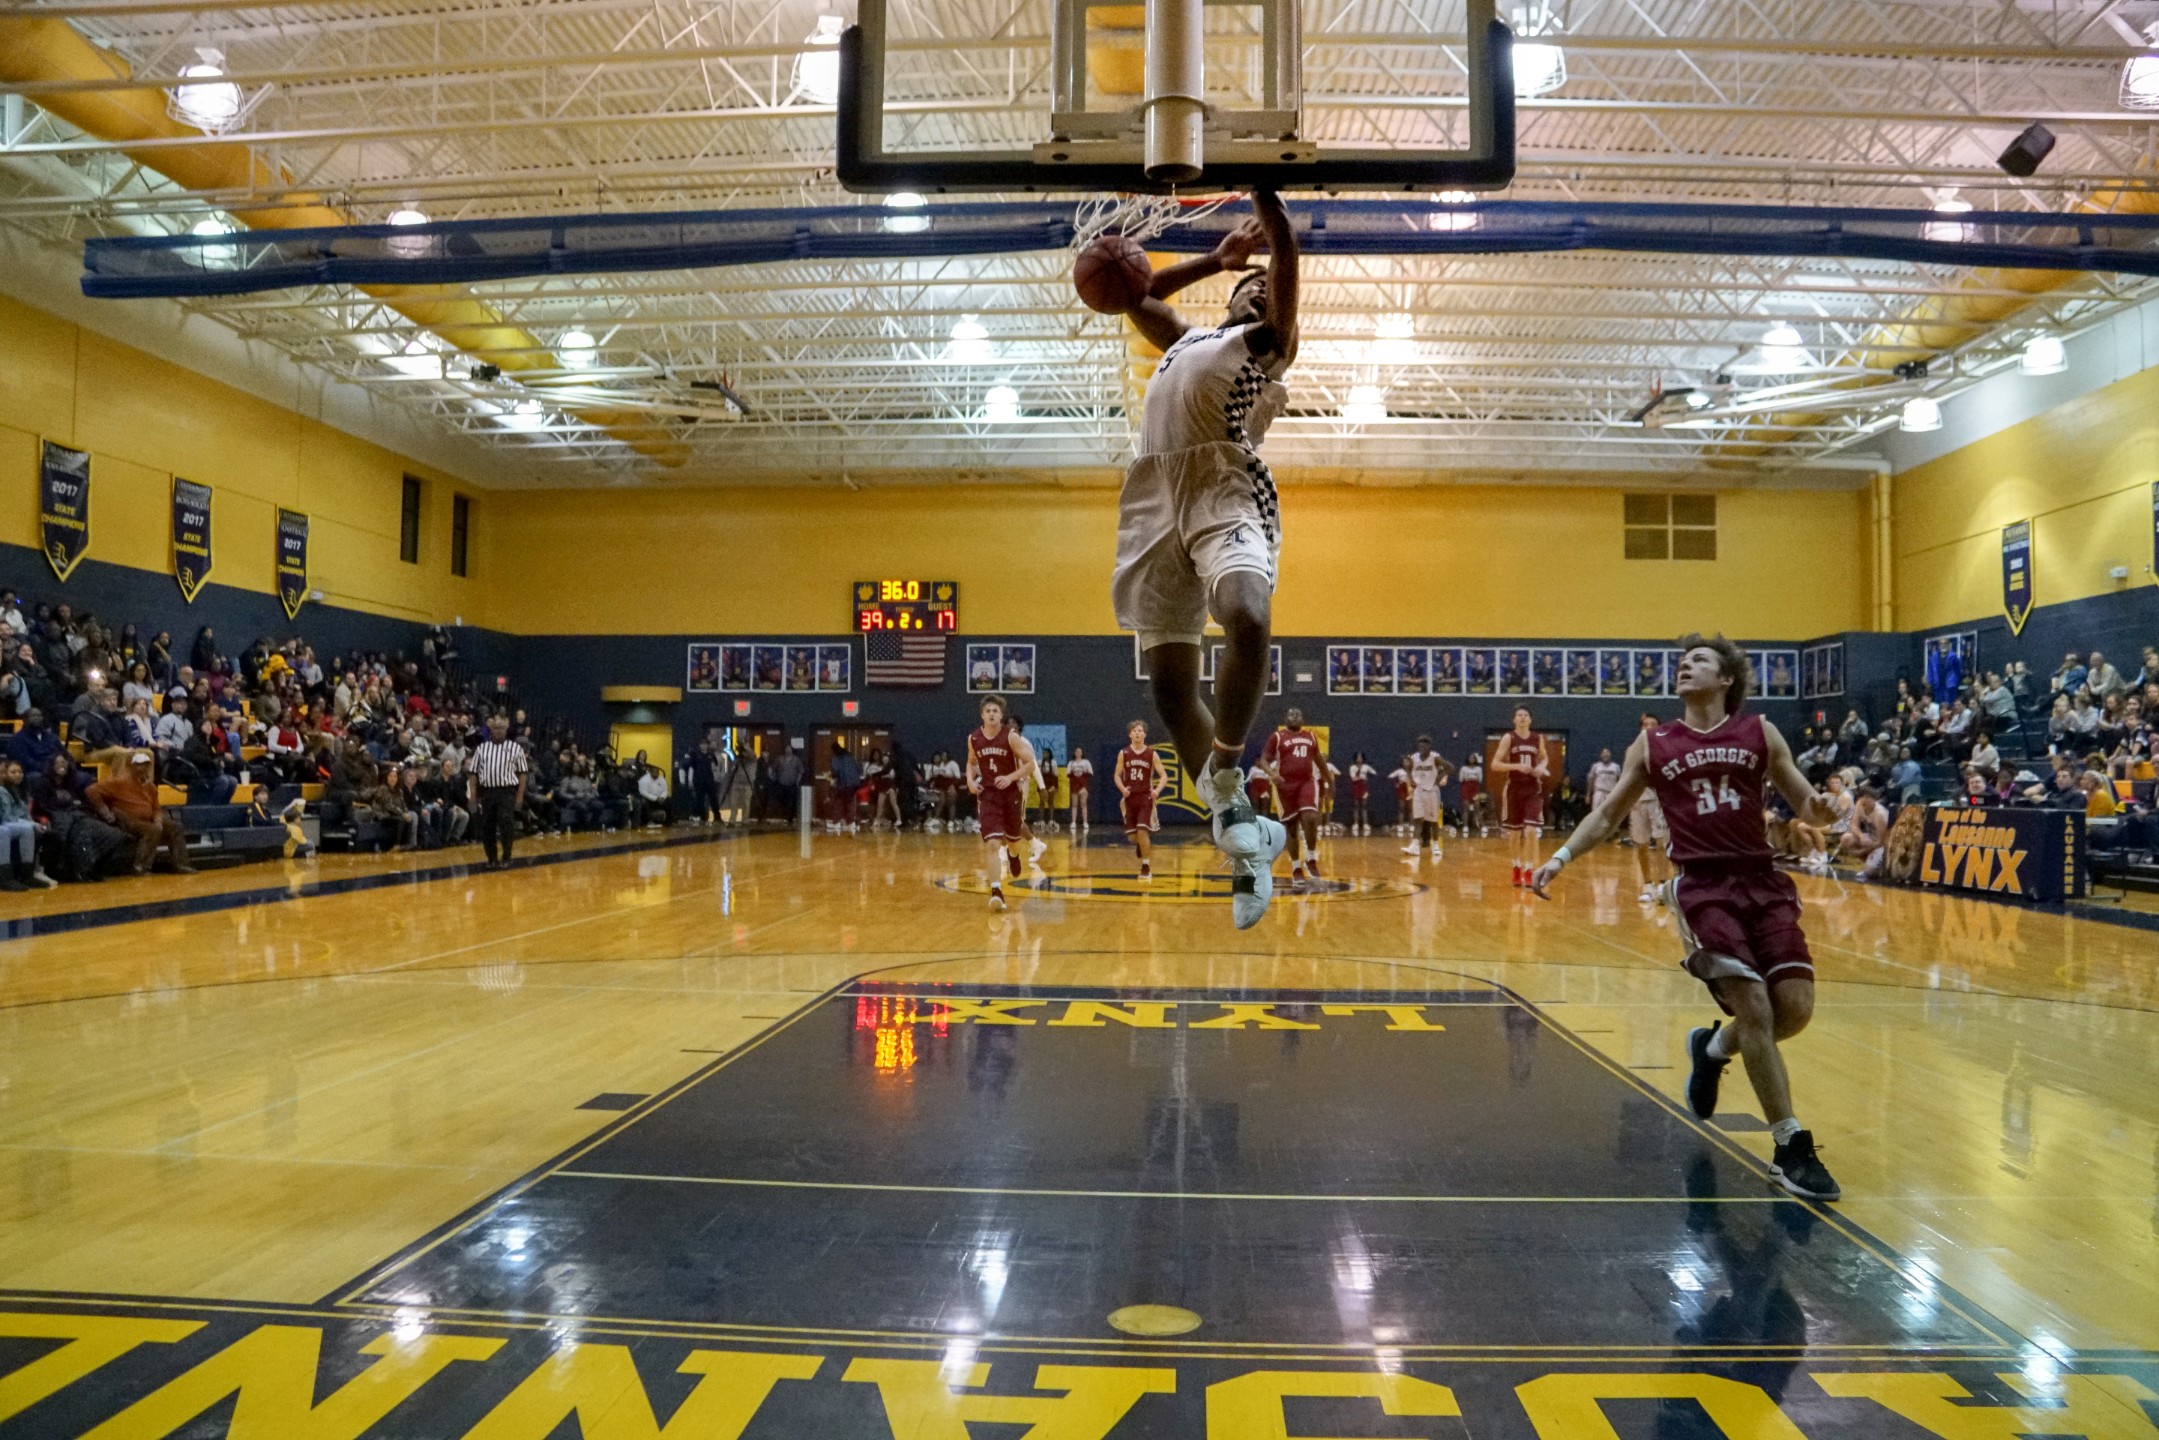 Basketball player dunking ball during game